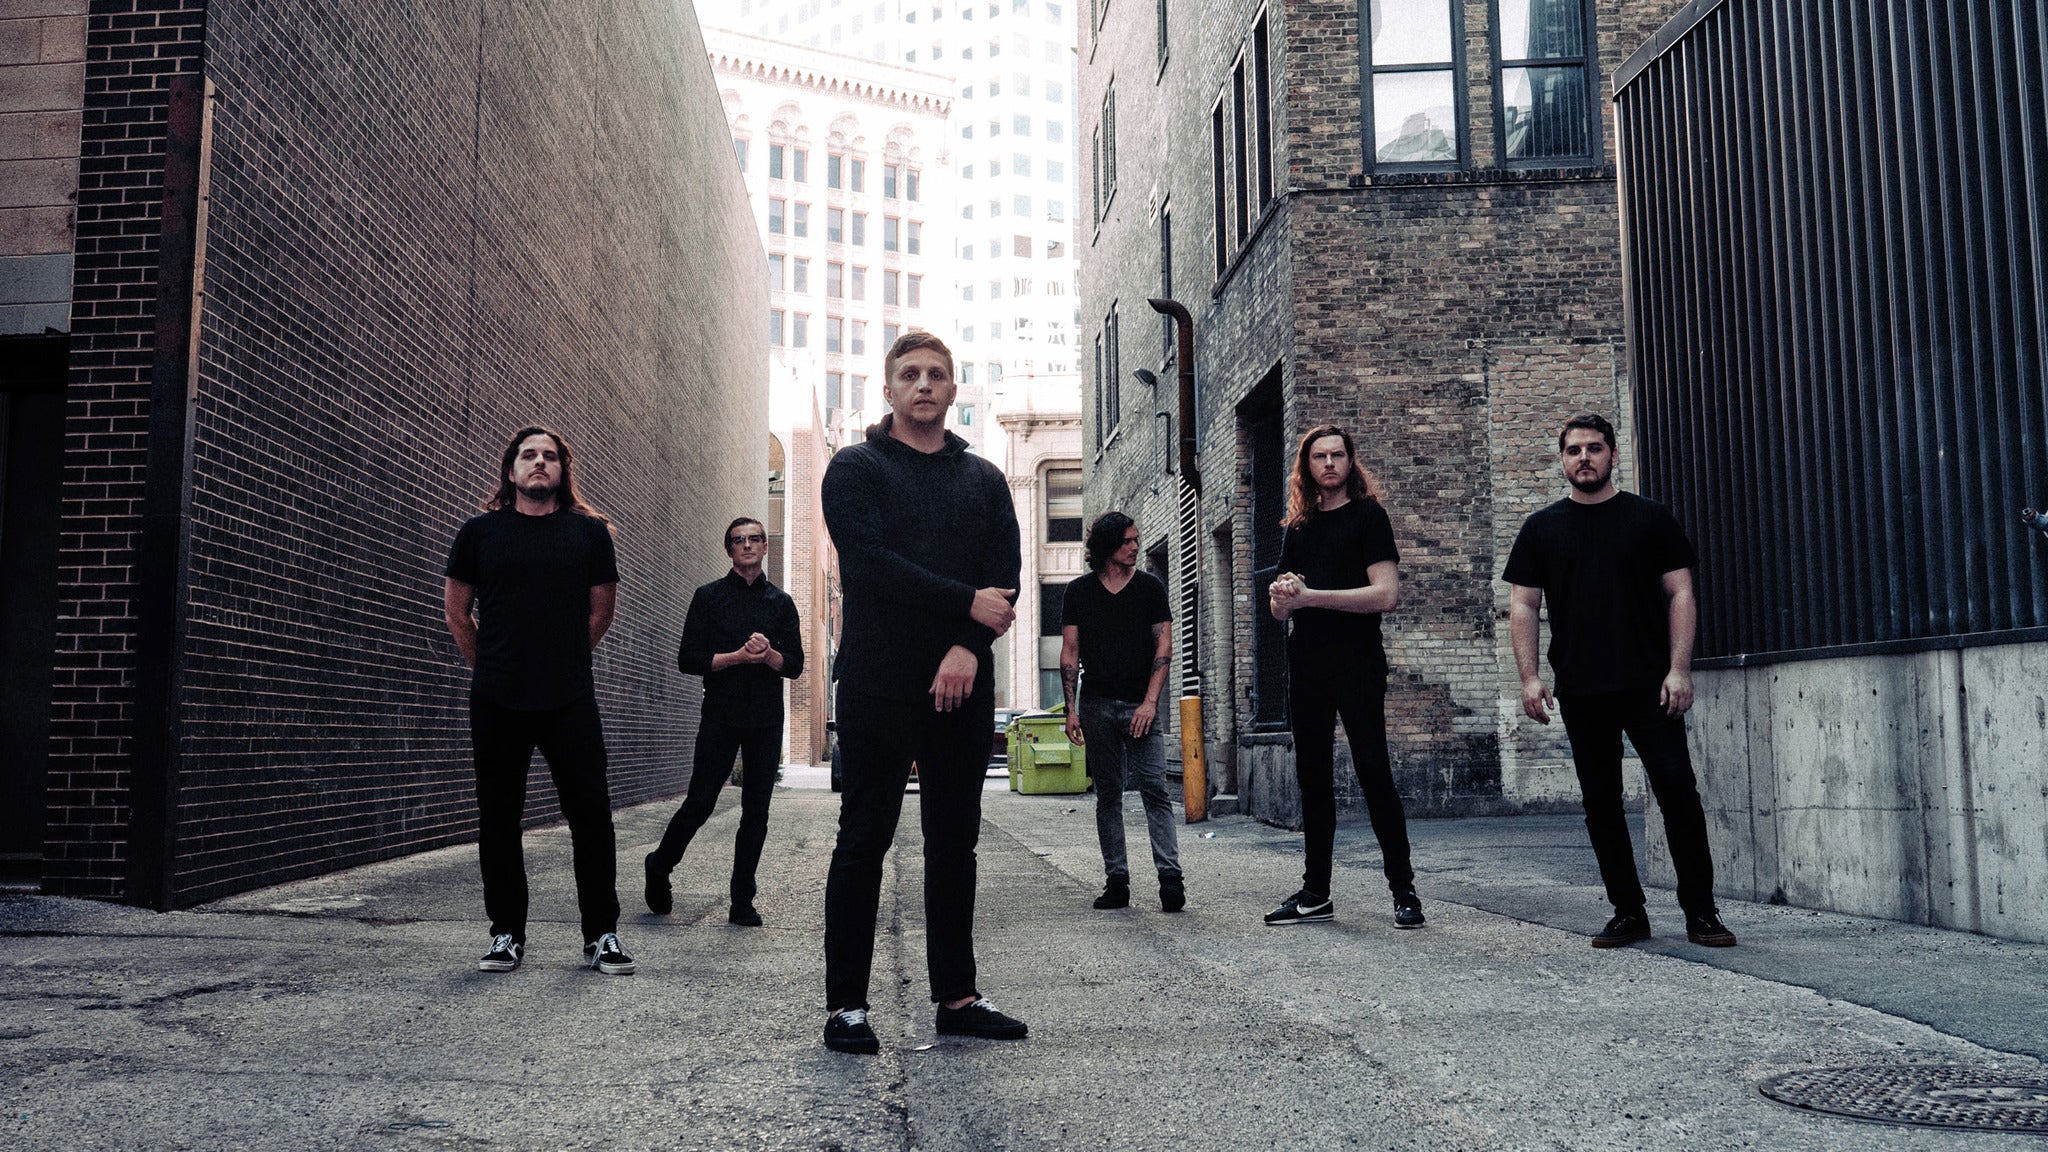 The Contortionist: Language & Exoplanet In Their Entirety.